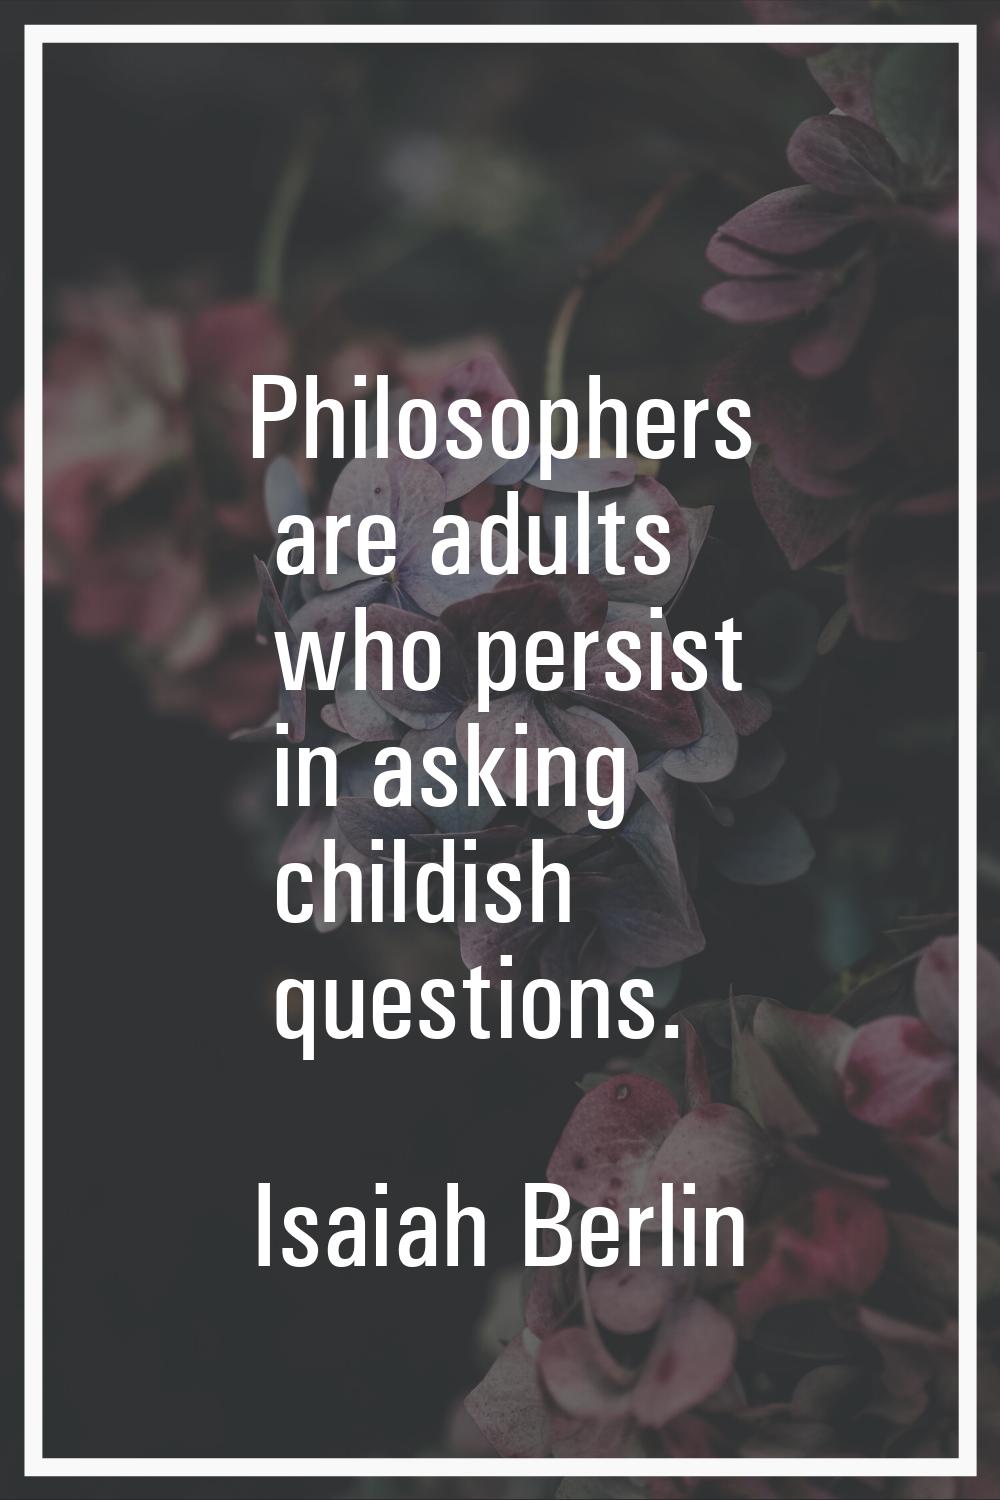 Philosophers are adults who persist in asking childish questions.